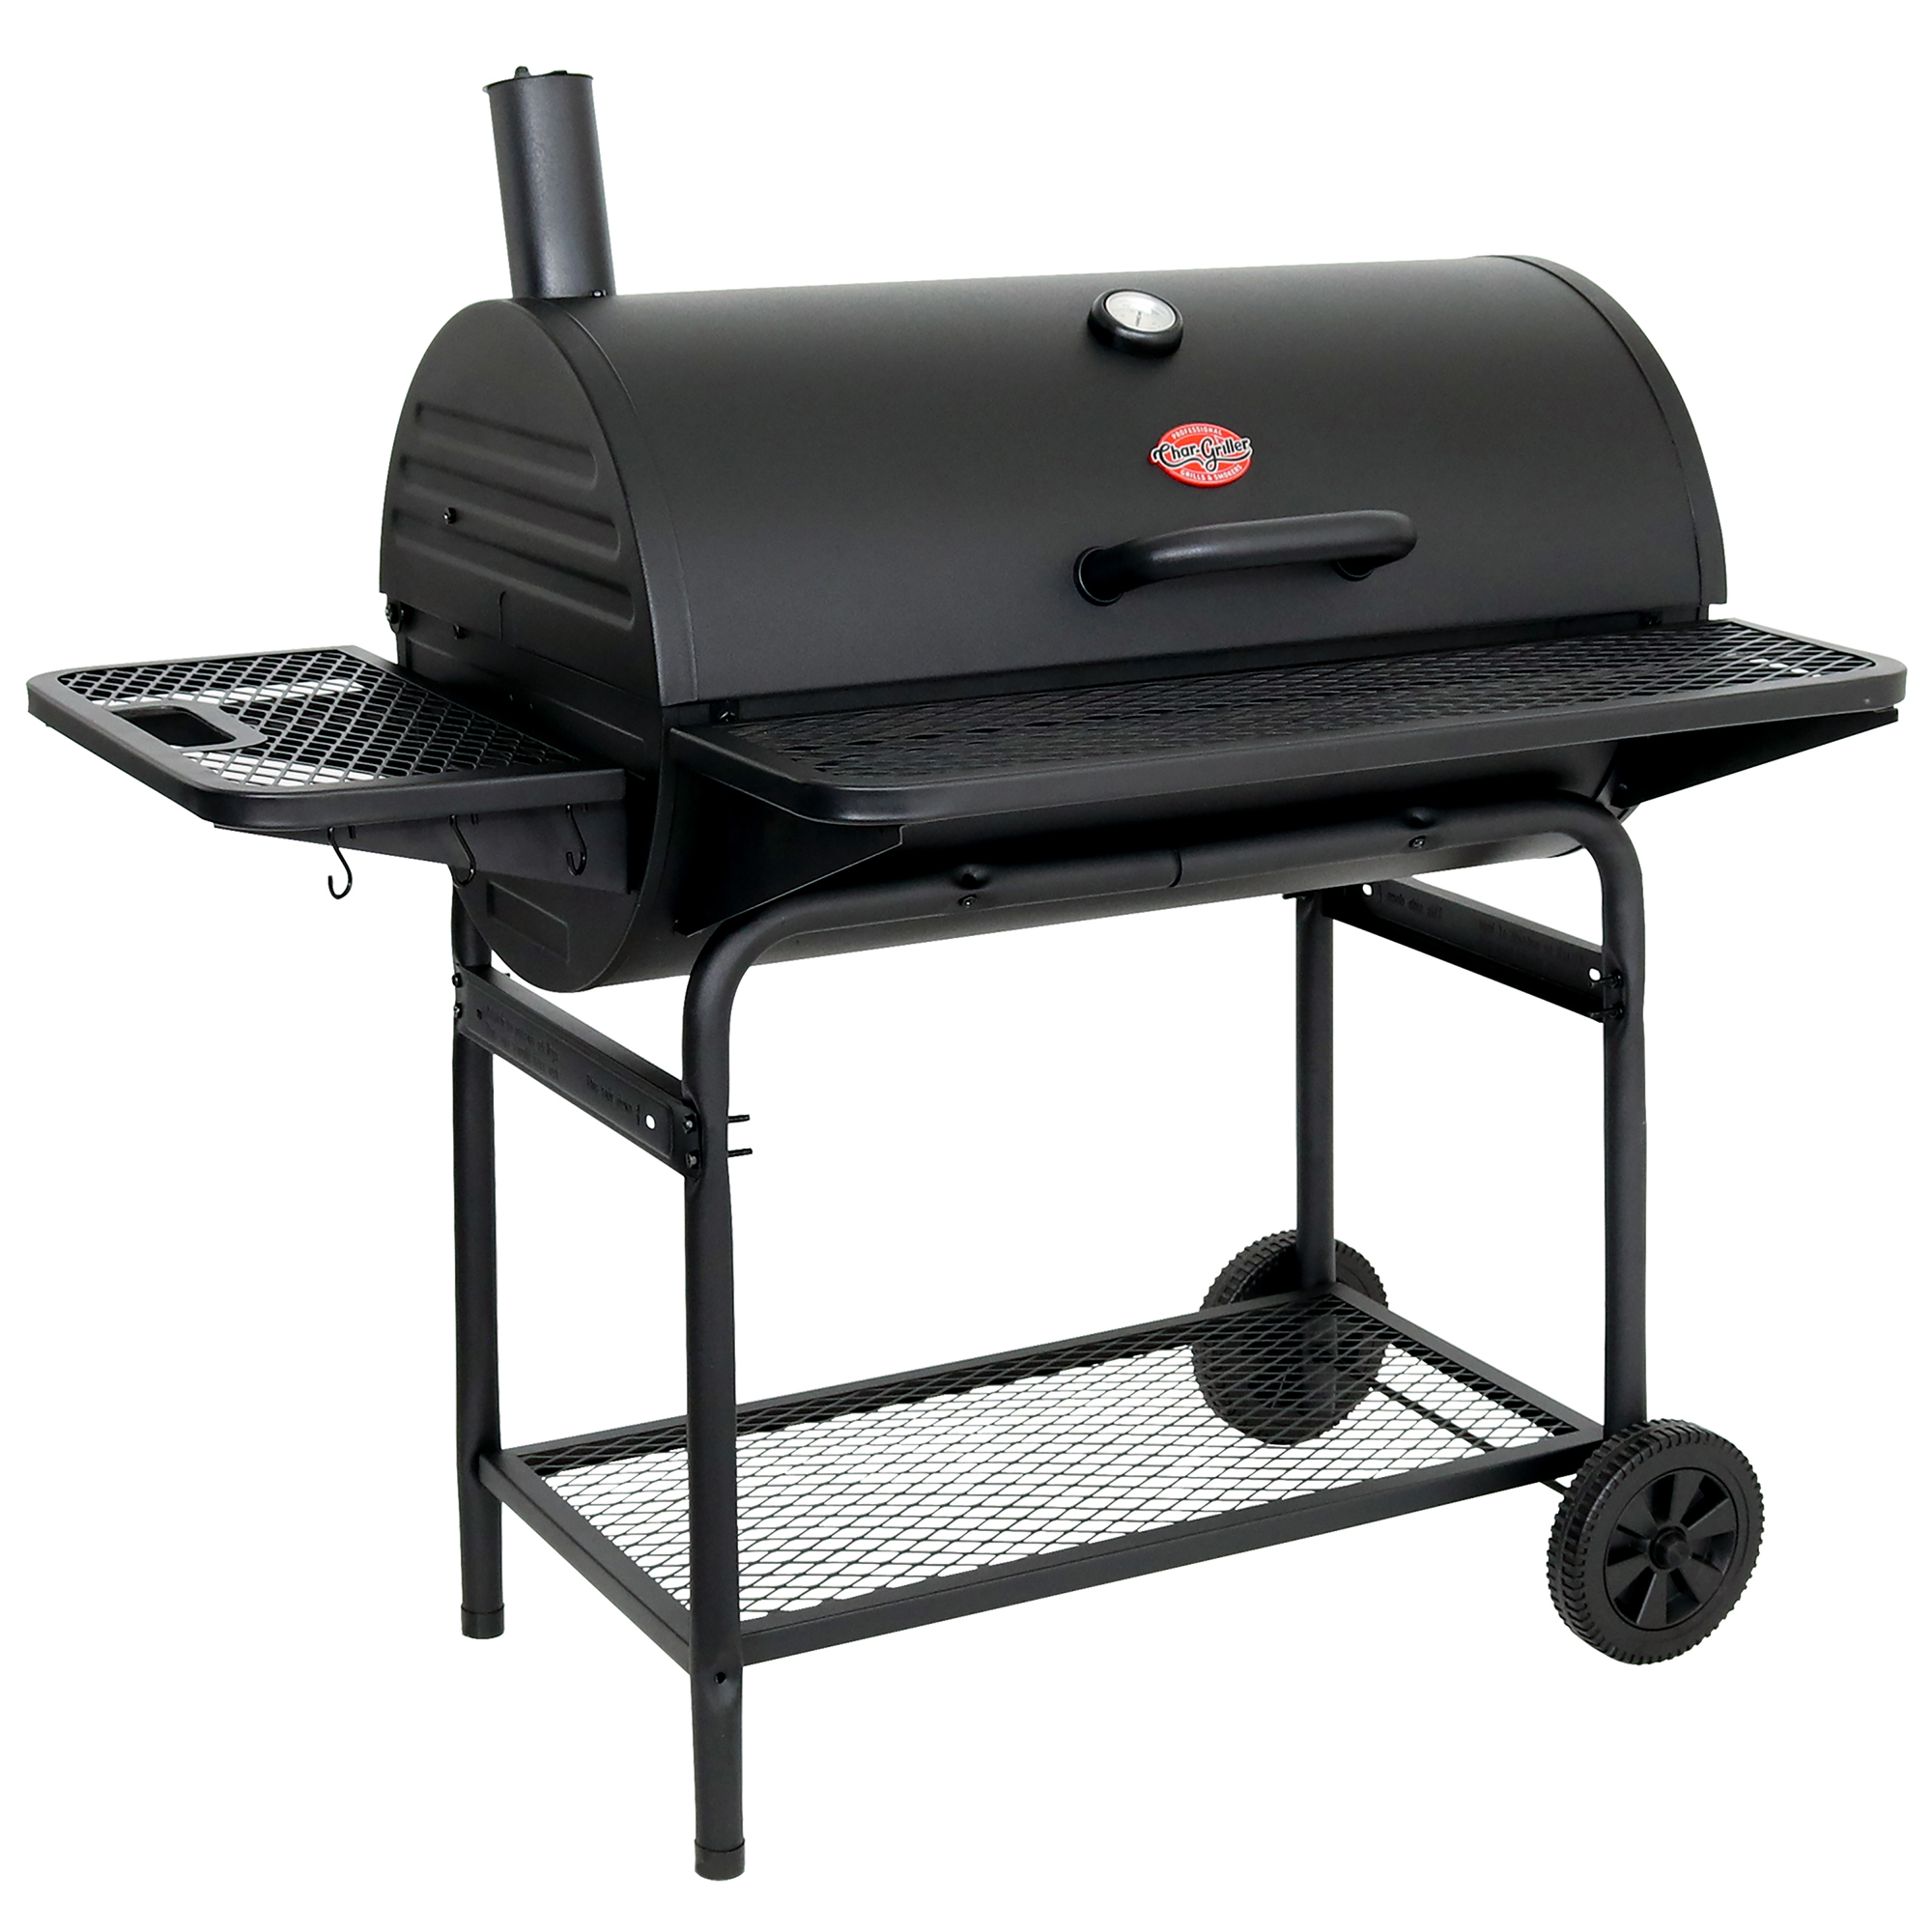 Char-Griller Pro Deluxe XL Charcoal Barrel Grill - image 5 of 8